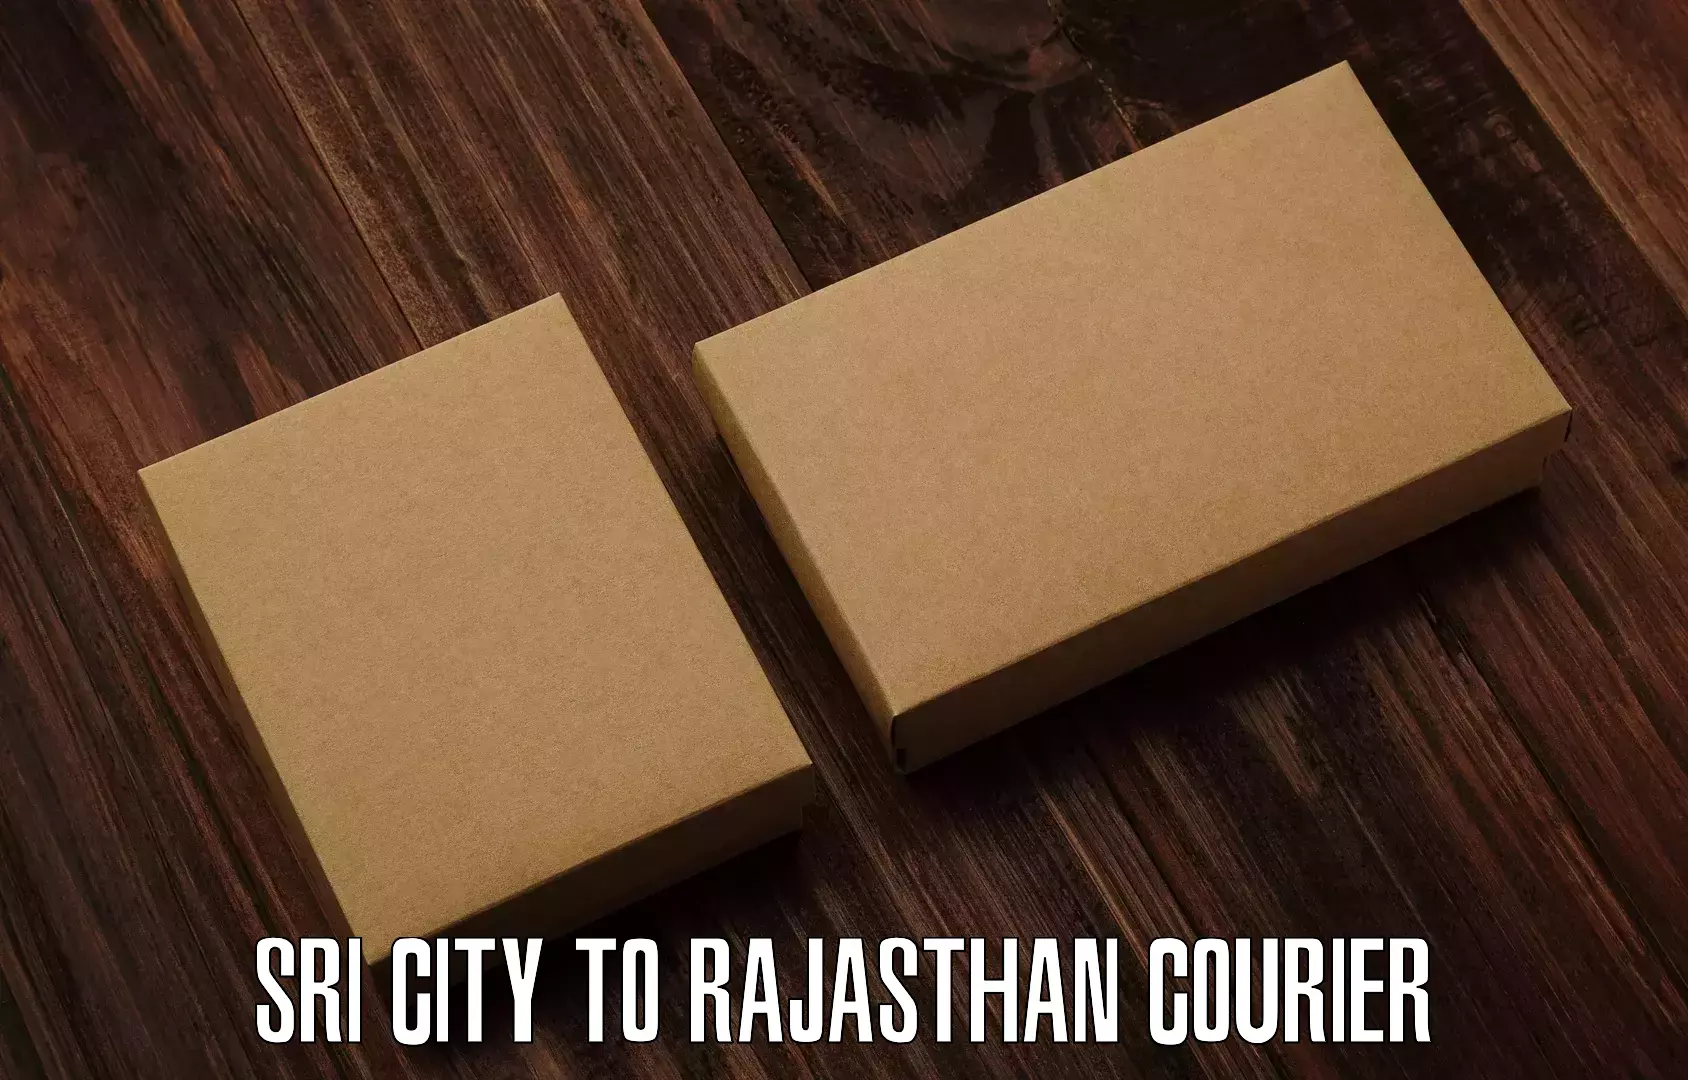 Personal courier services Sri City to Pilani